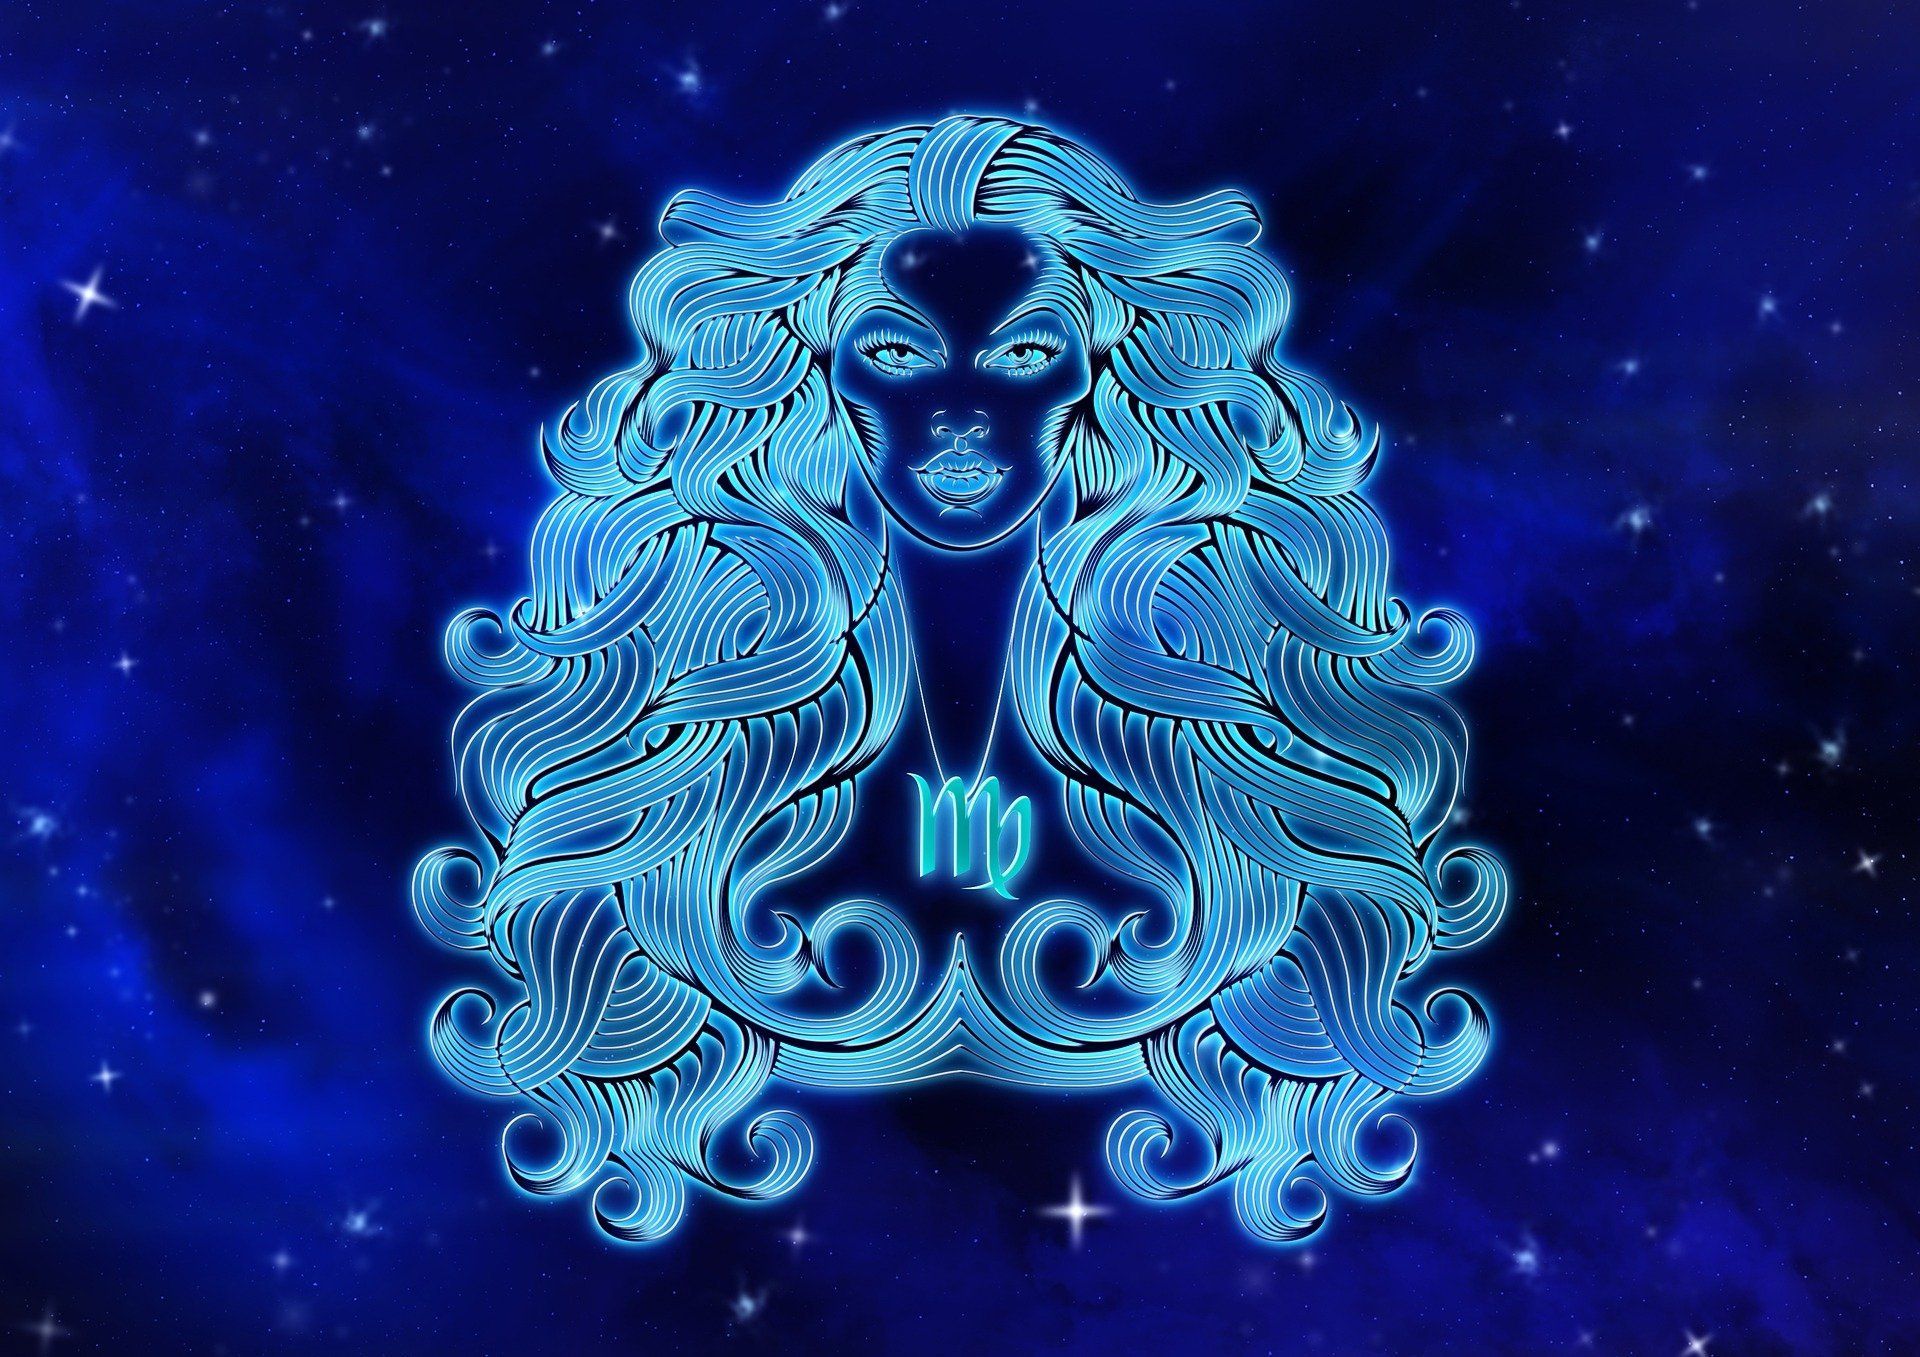 A graphic of a woman with long curly hair with the sign of Virgo over her head. - Virgo